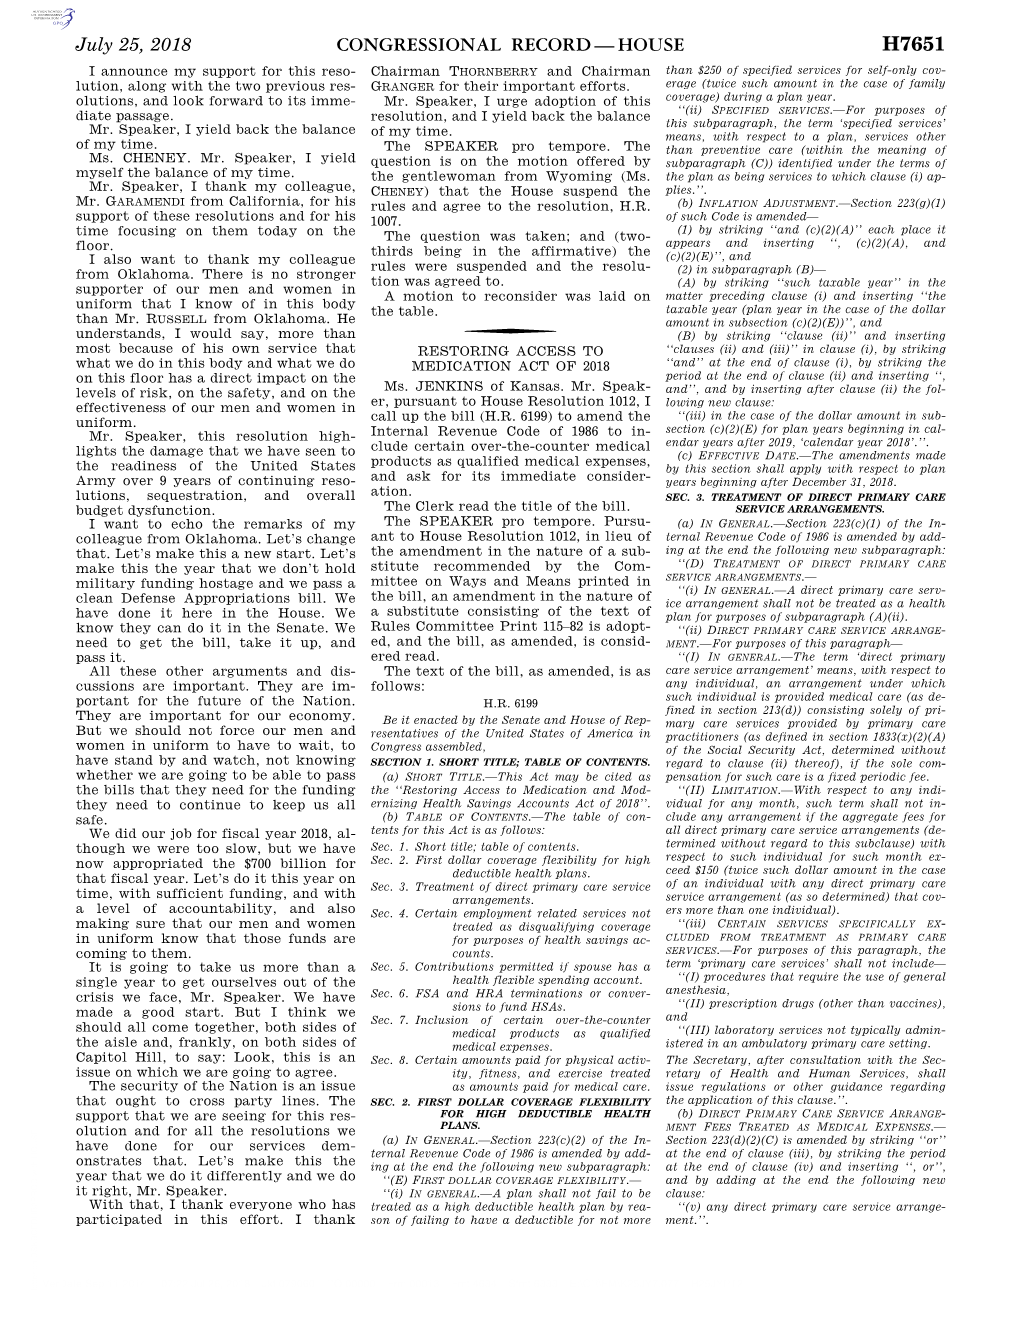 Congressional Record—House H7651